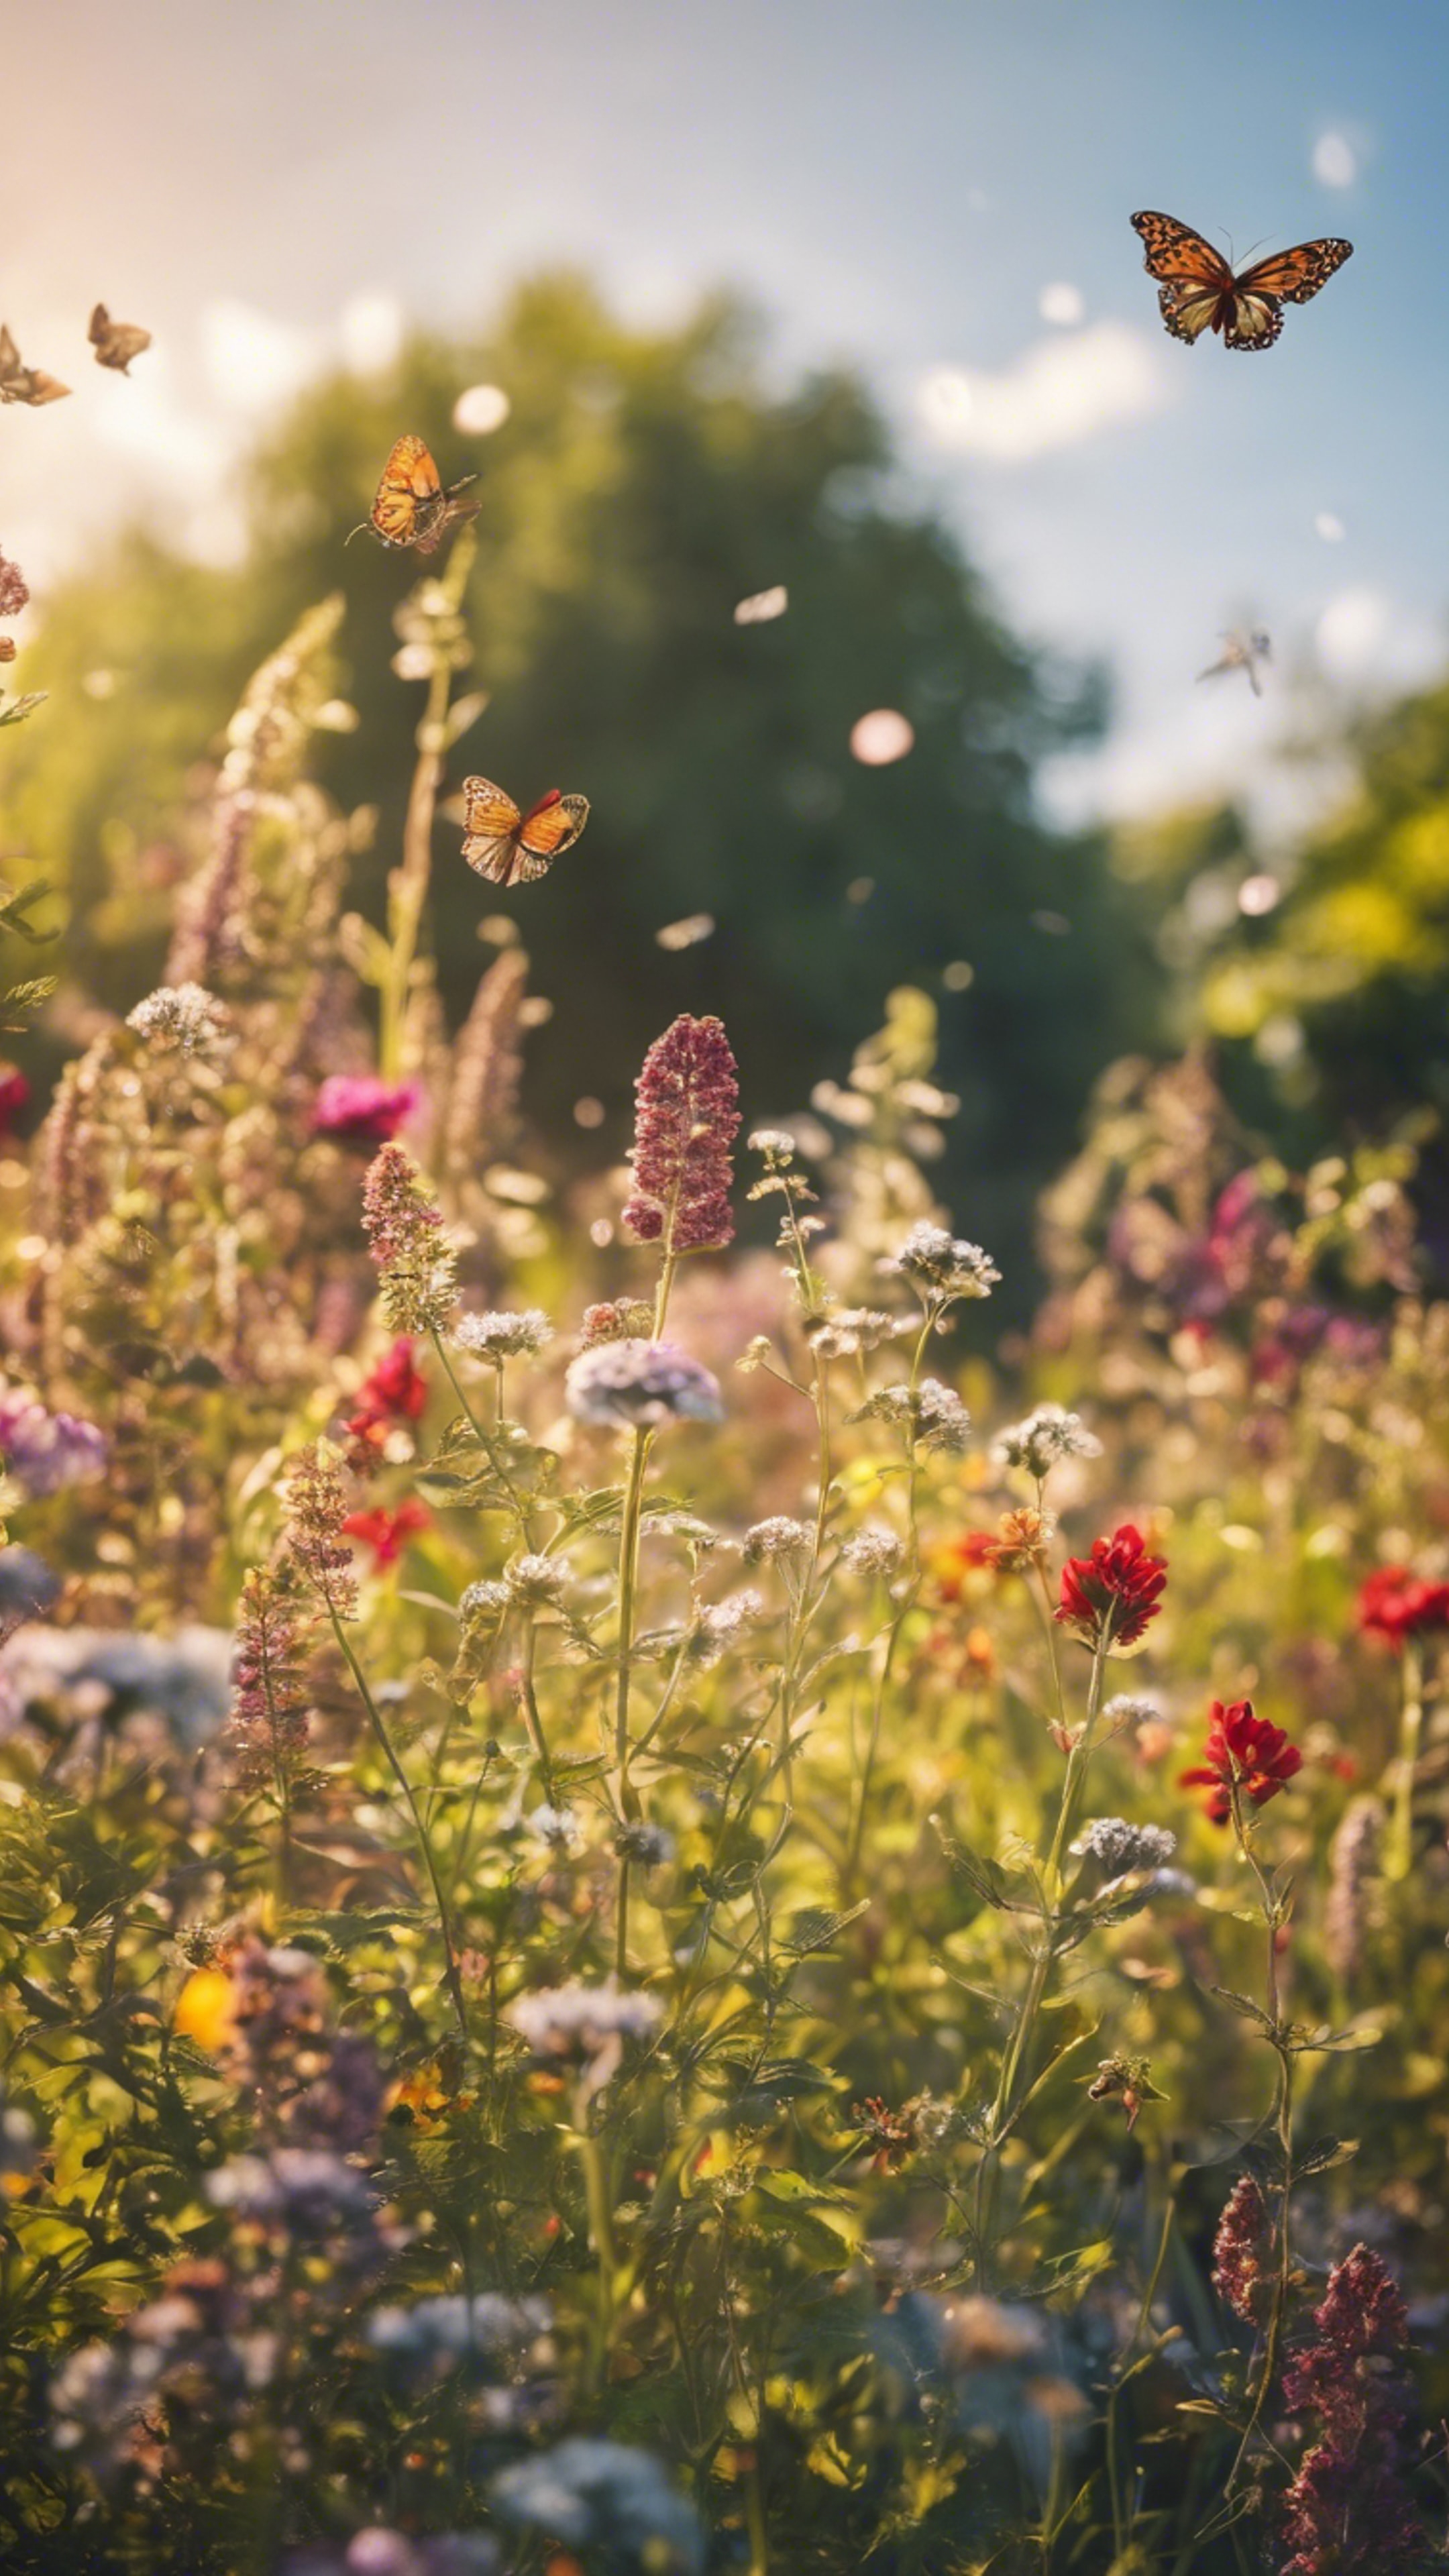 A colorful scene of a French country garden bursting with wildflowers and butterflies under a warm afternoon sun. Taustakuva[d1166188c03b4b319ebf]